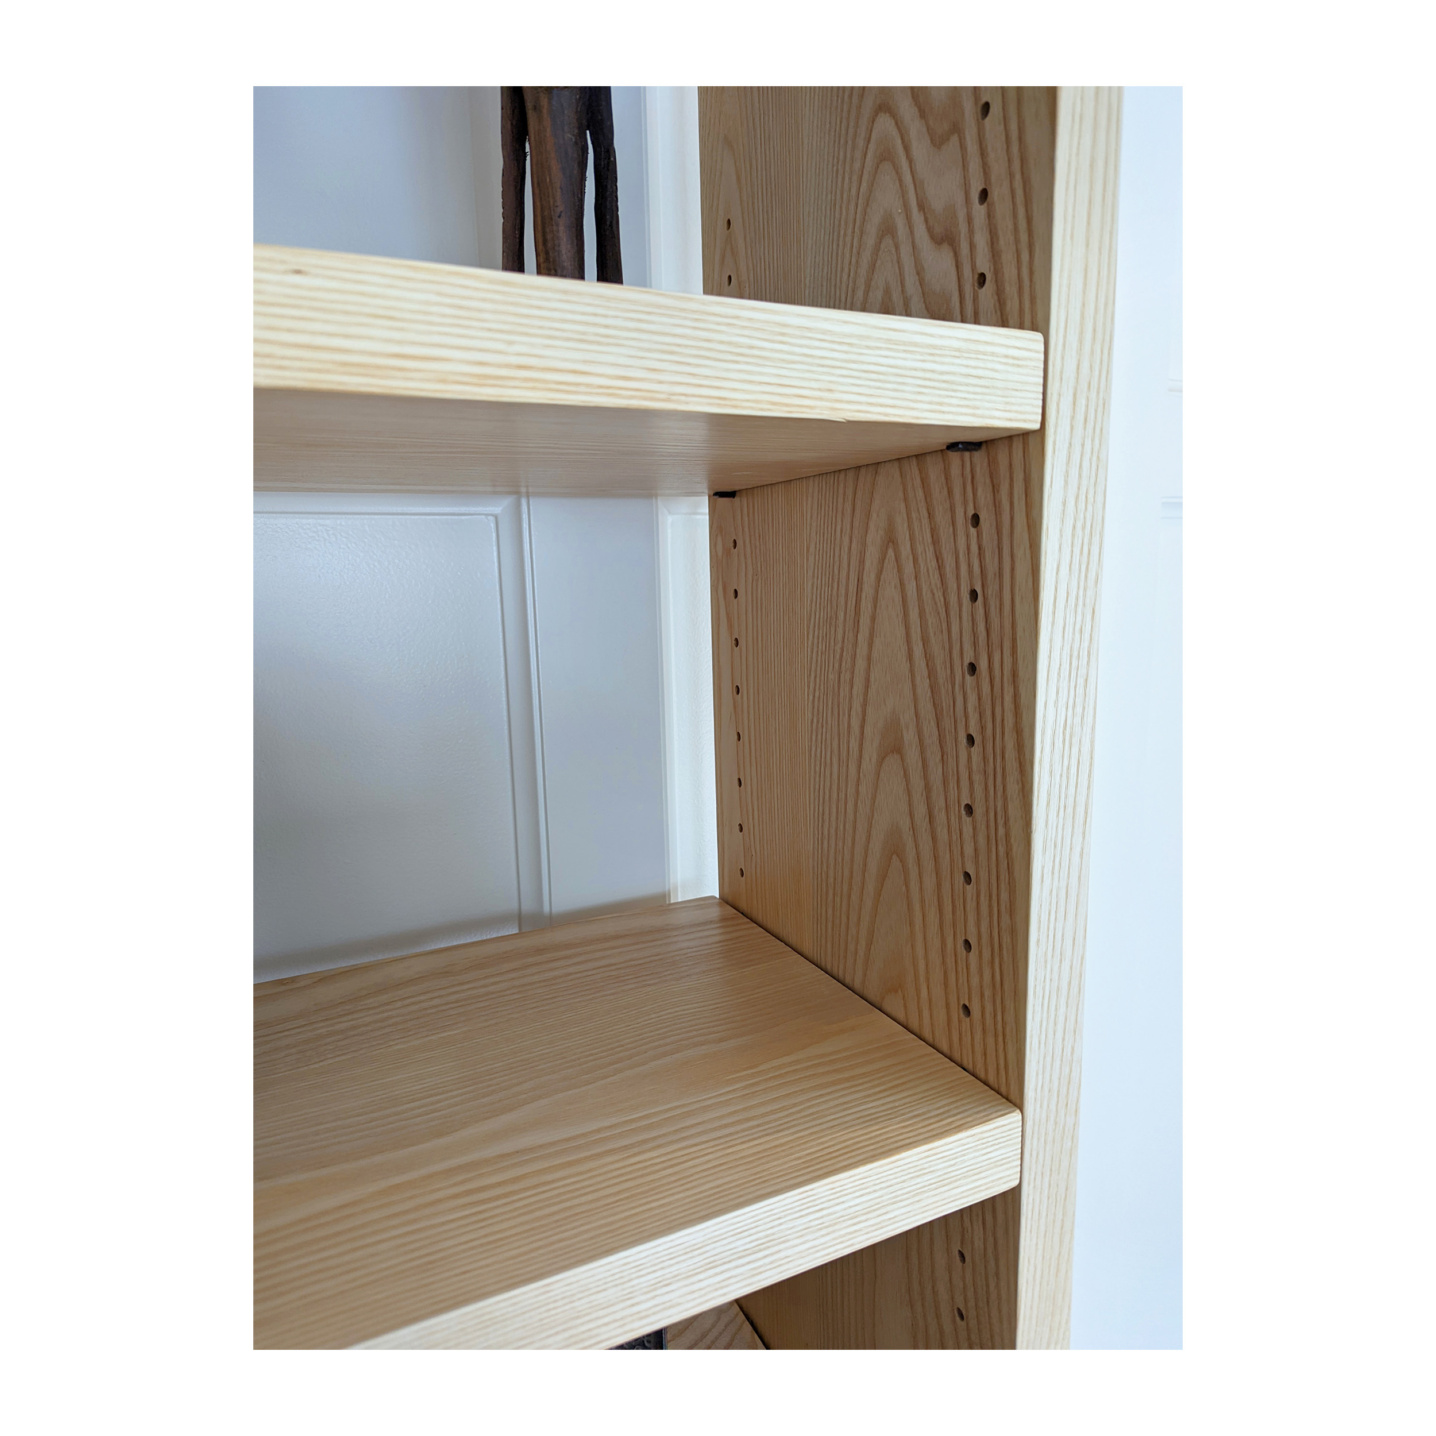 Solid wood adjustable bookcase shelves--Made by 57NorthPlank Tailored Modern Furniture